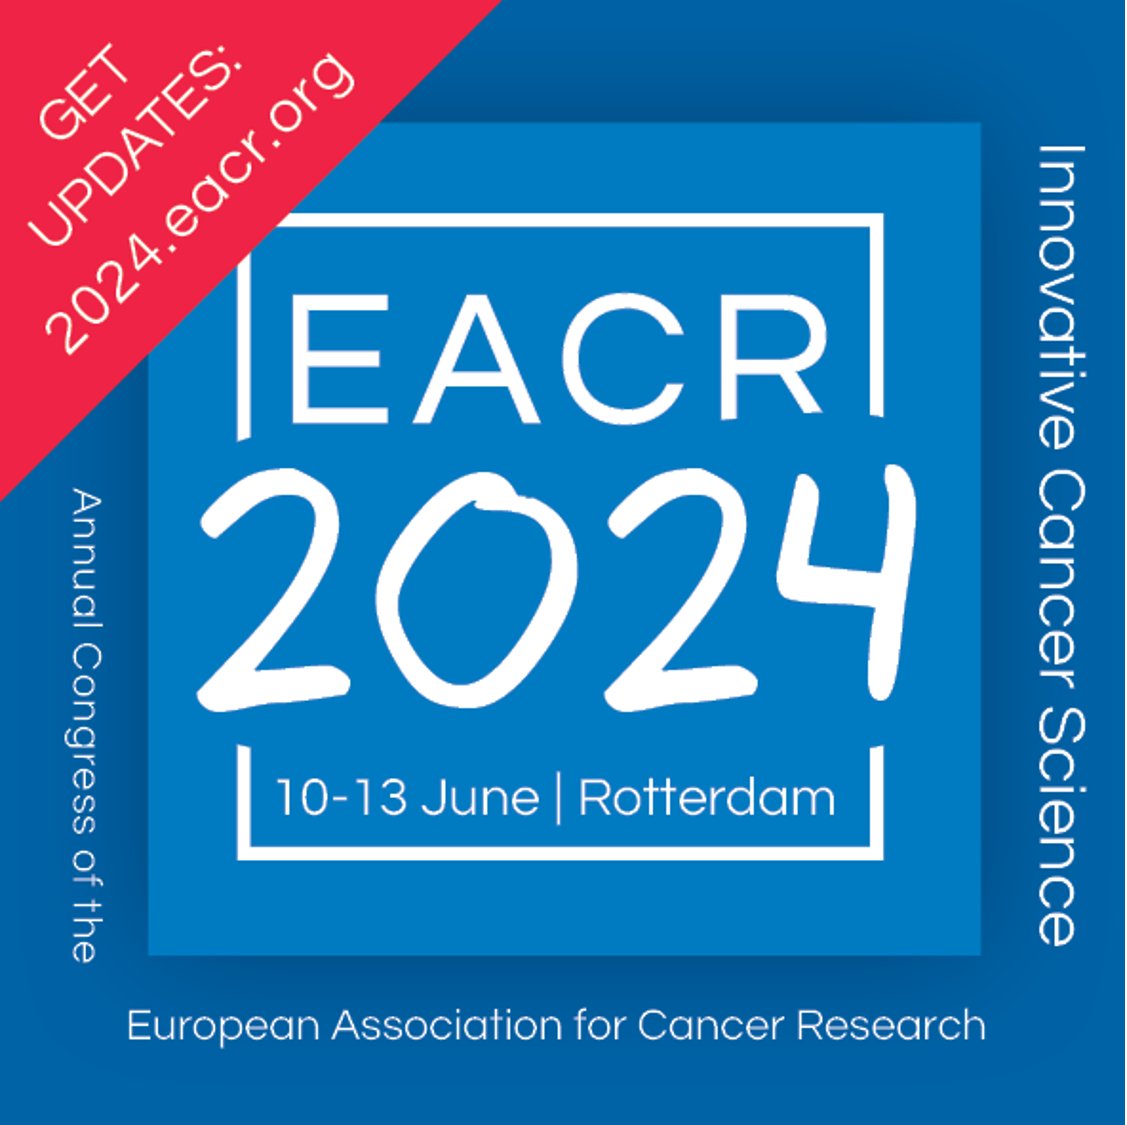 📢One of the best annual events in Cancer Research is coming! Great speakers, excellent scientific content...get ready for the next @EACRnews Congress! 📅Save the date: 10-13 June 2024 in Rotterdam! 👉Early Rate Registration: 29/04/24 👉Regular Rate Registration: 27/05/24